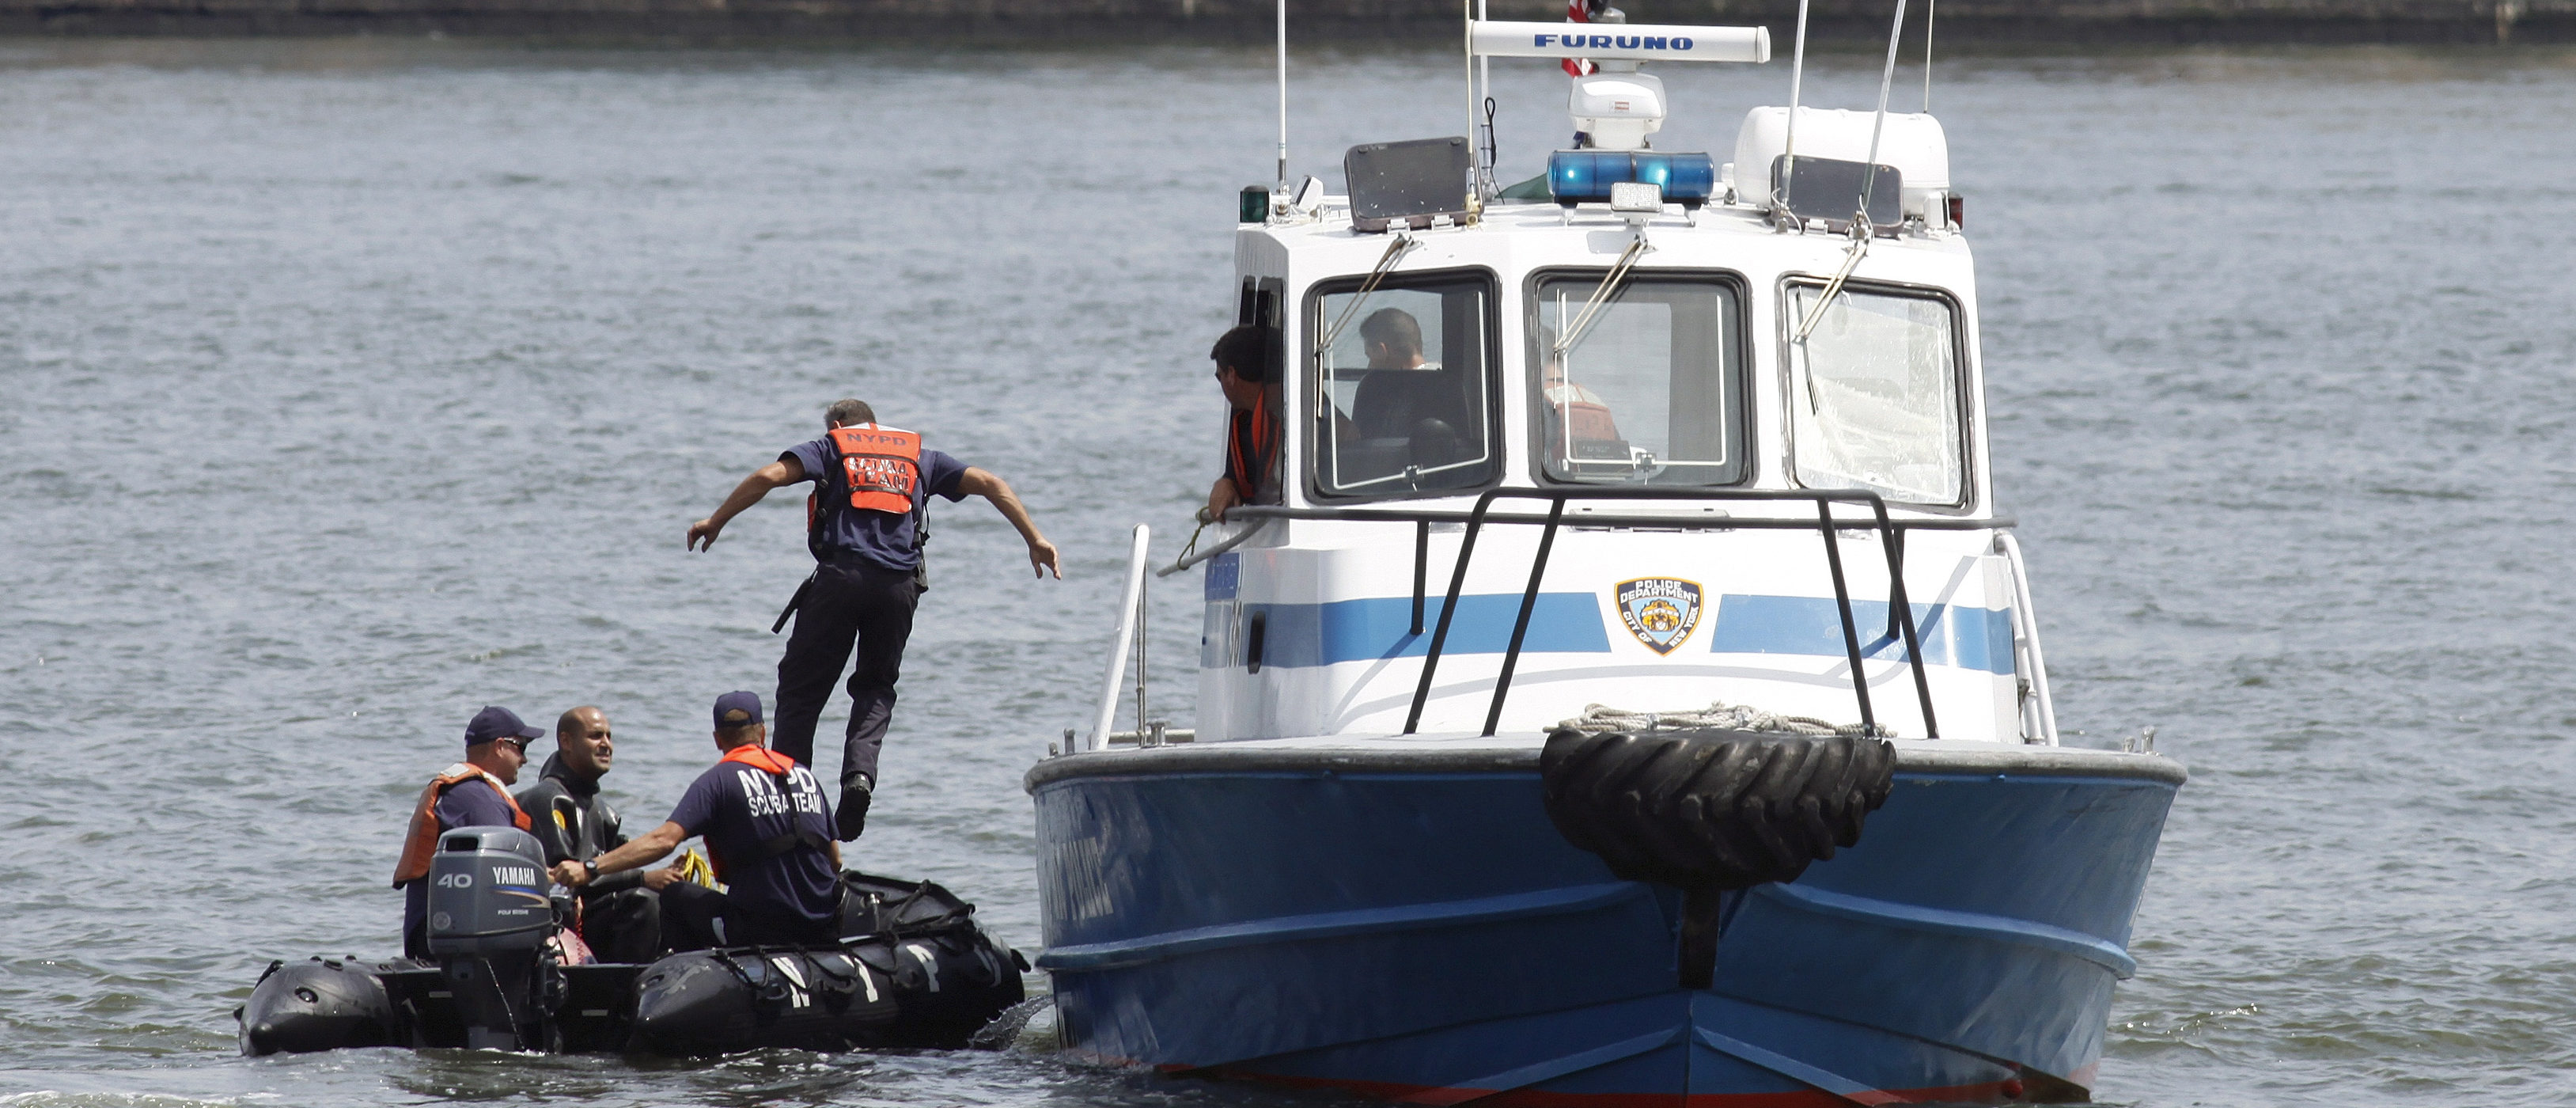 A NYPD scuba team is on site of a crash between a helicopter and an aircraft over the Hudson River, between New York and Hoboken, New Jersey, August 8, 2009. The tour helicopter collided with the small plane in midair and both crashed into the Hudson River near lower Manhattan, police reported on Saturday.     REUTERS/Gary Hershorn   